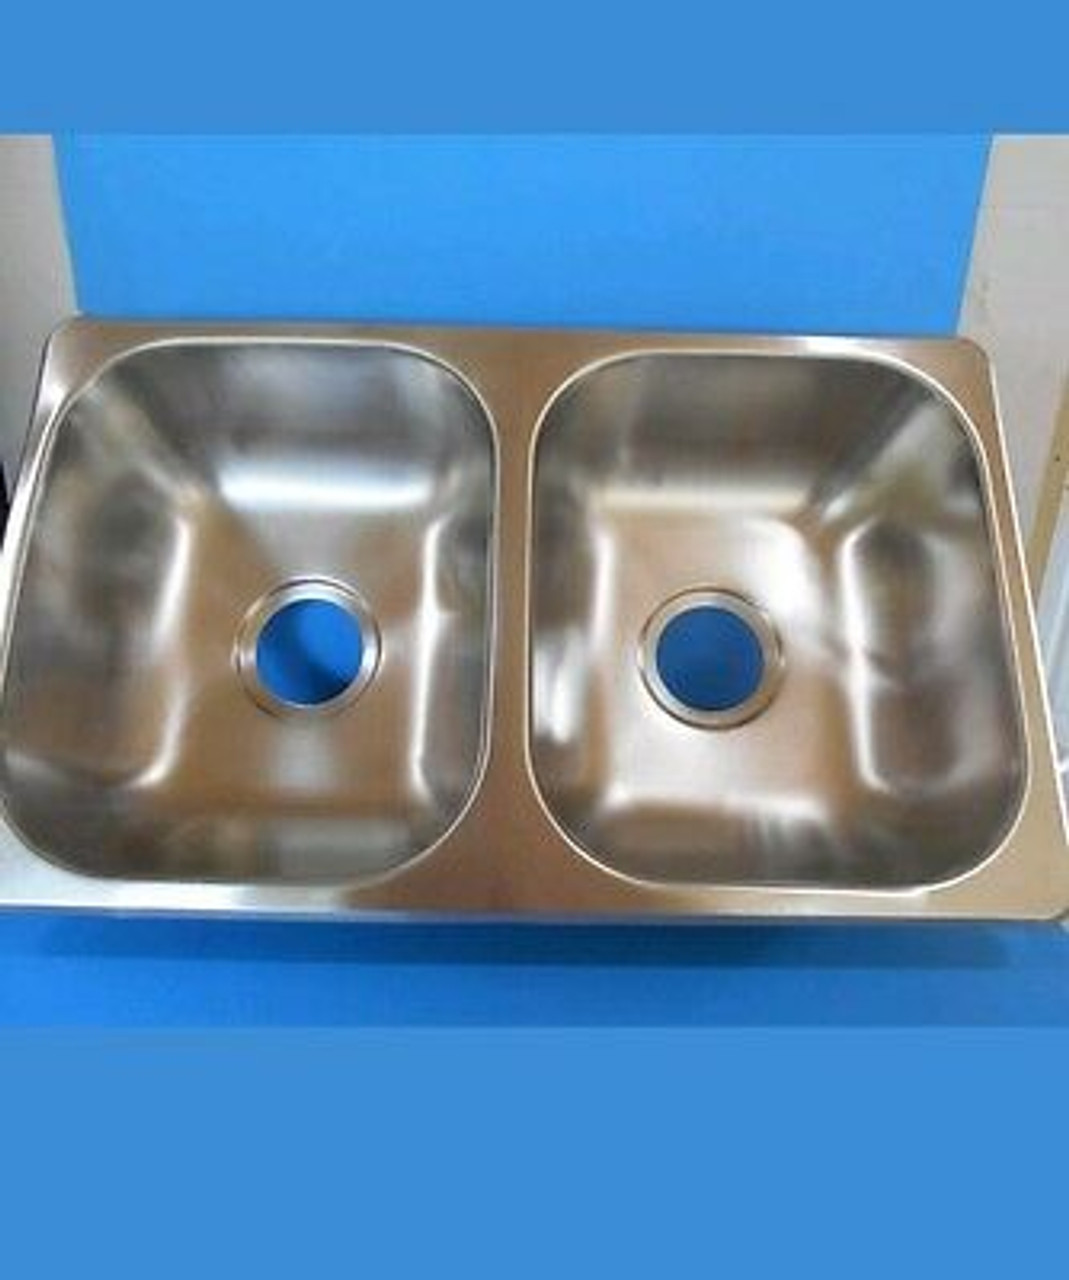 DOUBLE SINK, 25" X 15" - STAINLESS STEEL (10-1024)